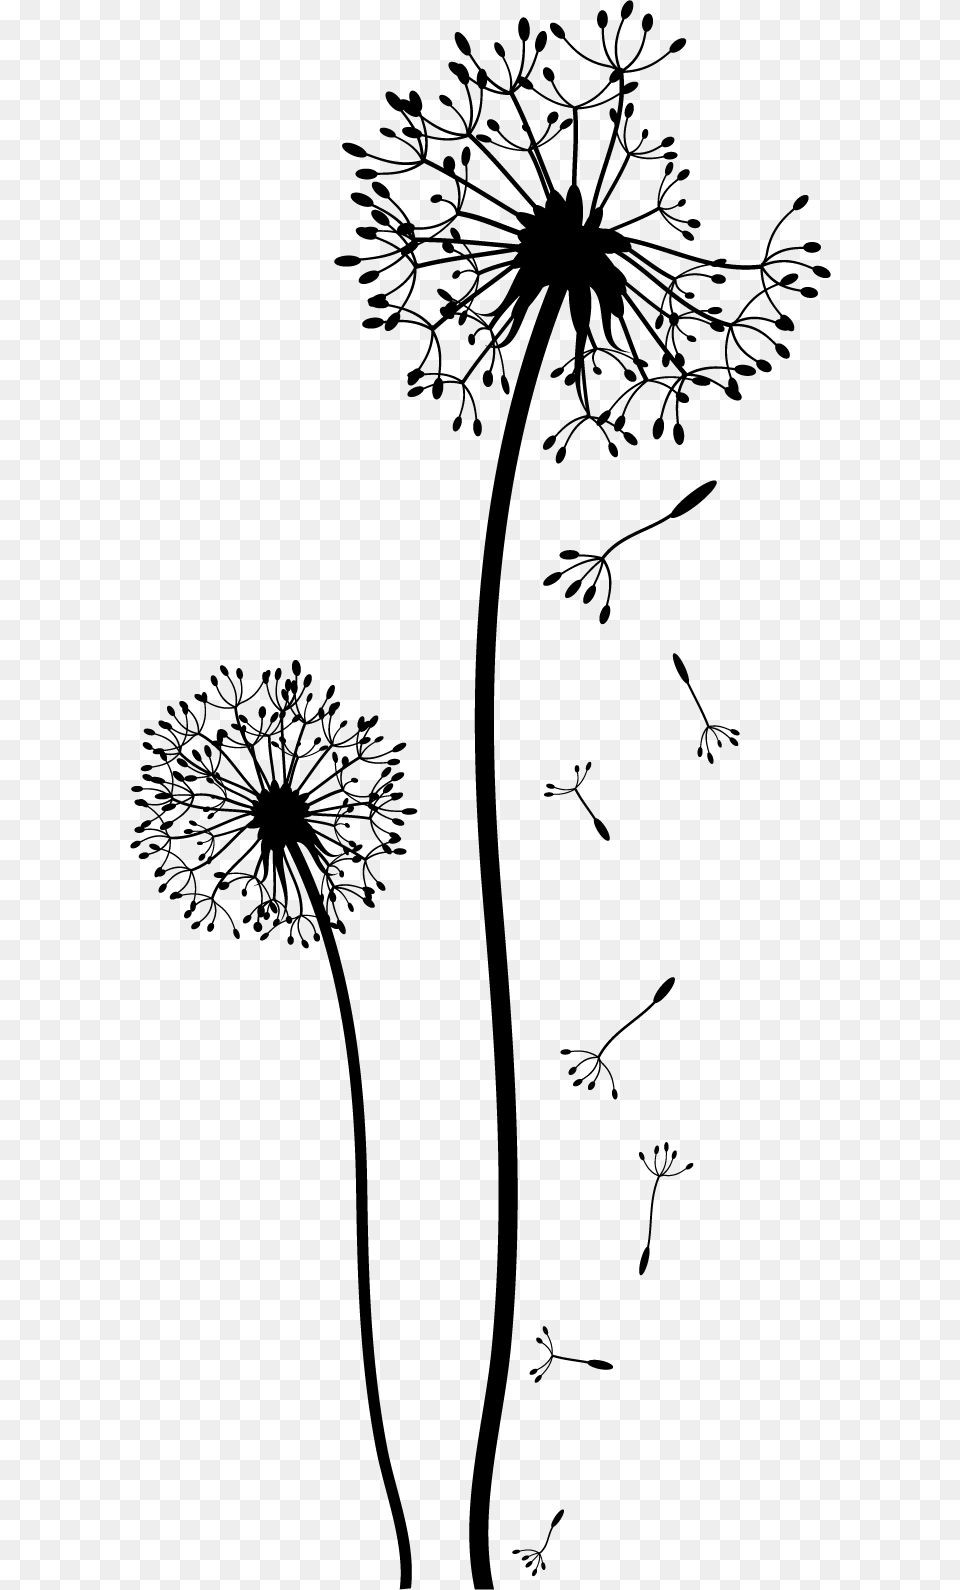 Dandelion Download Black And White Flower Drawing, Plant, Animal, Bird Png Image